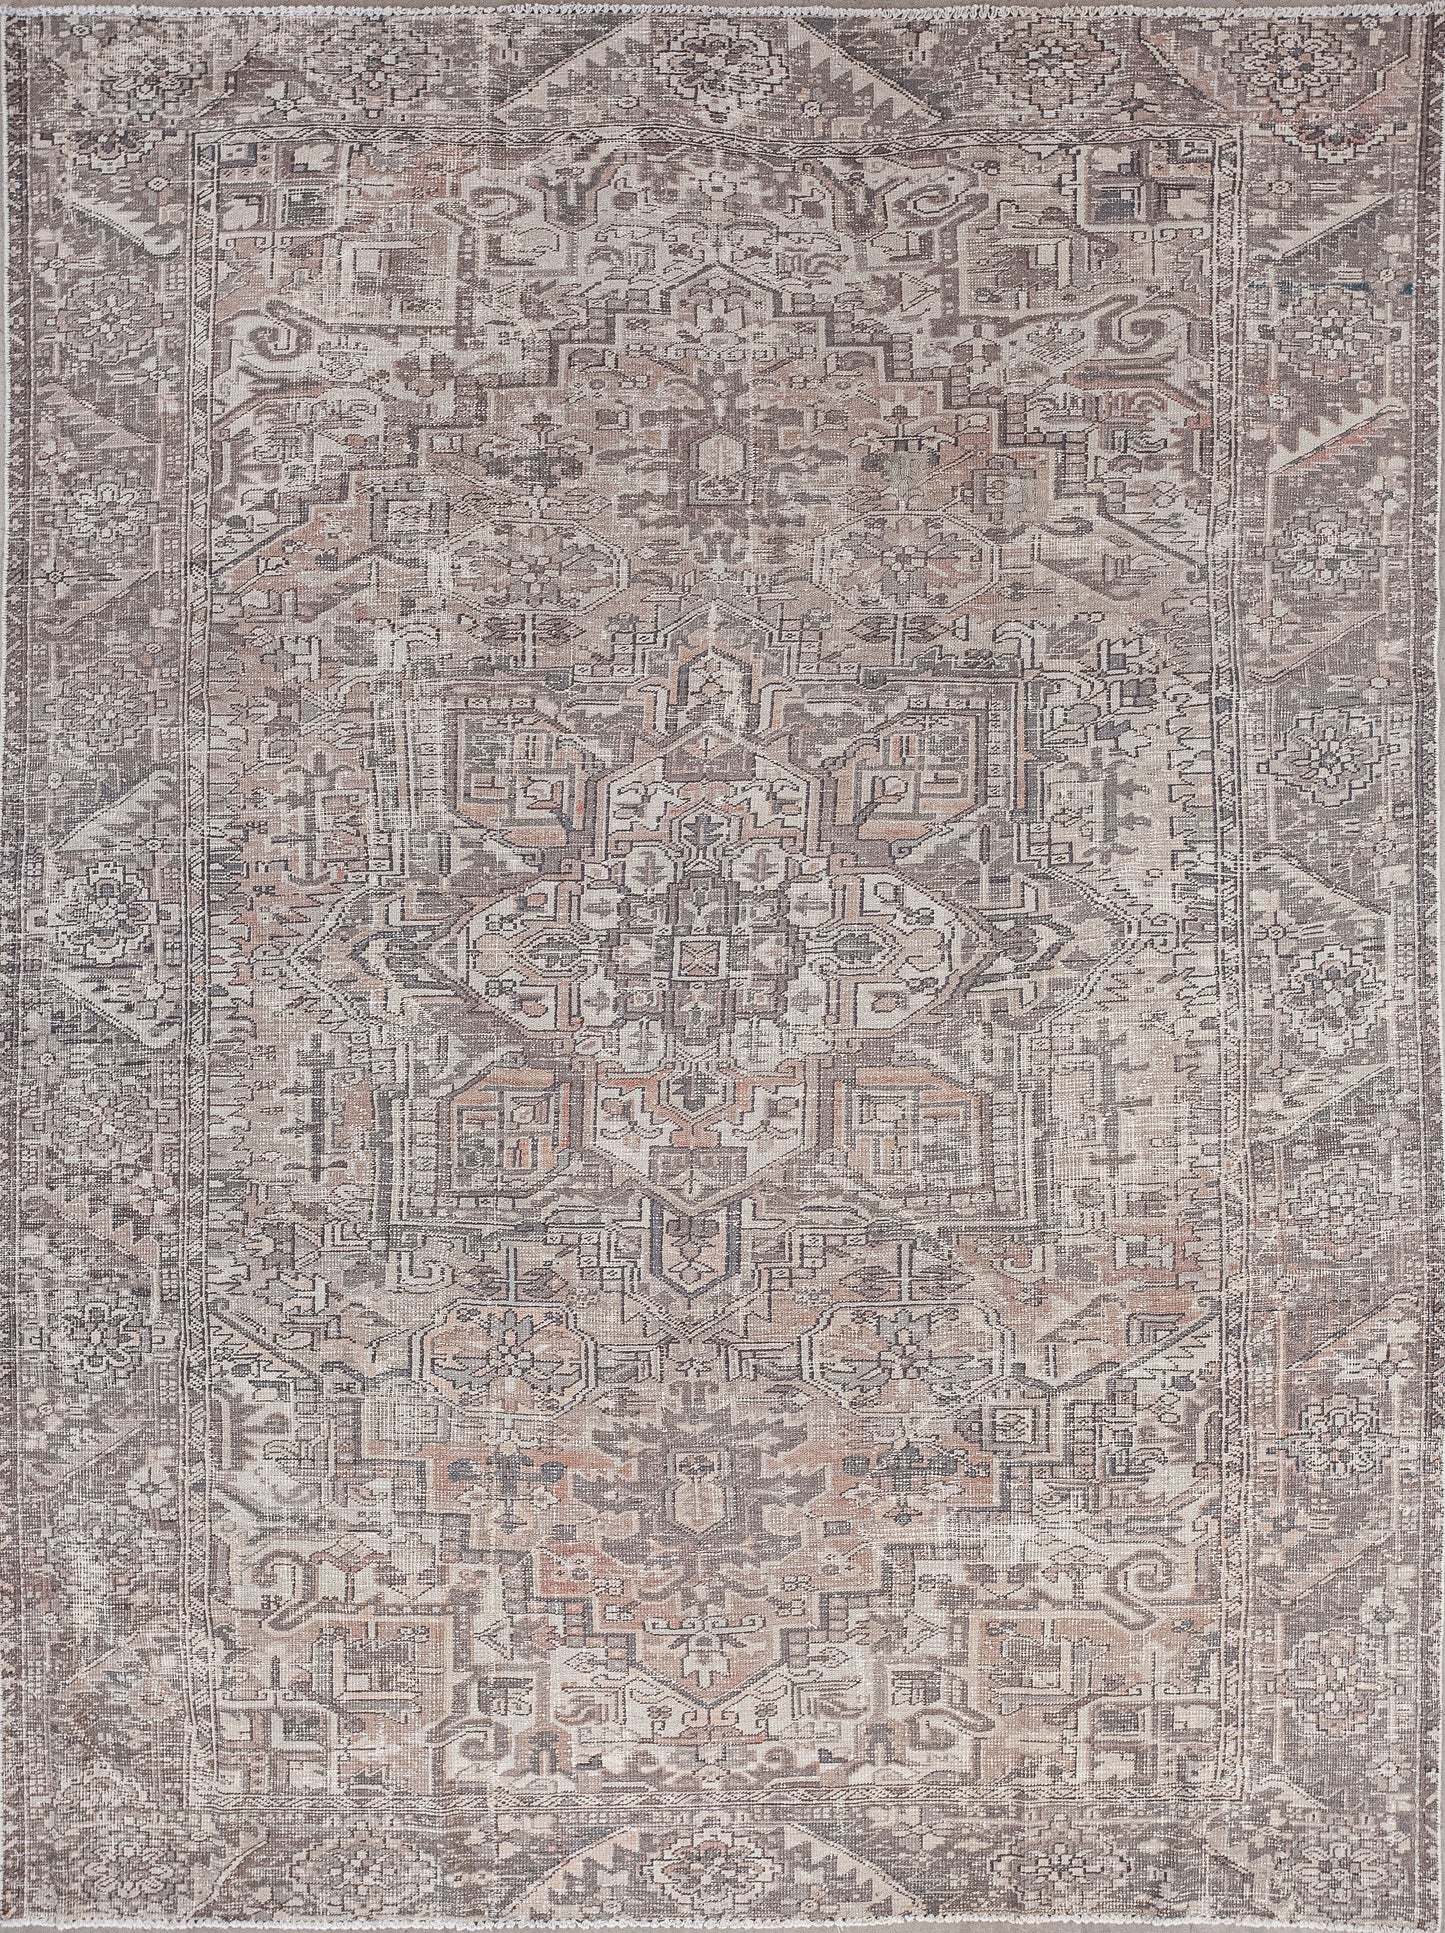 Anthropological woven rug comes loaded with language, culture, and ideology. If you are fan of history and tradition, you will find this carpet as a fascinating acquisition.